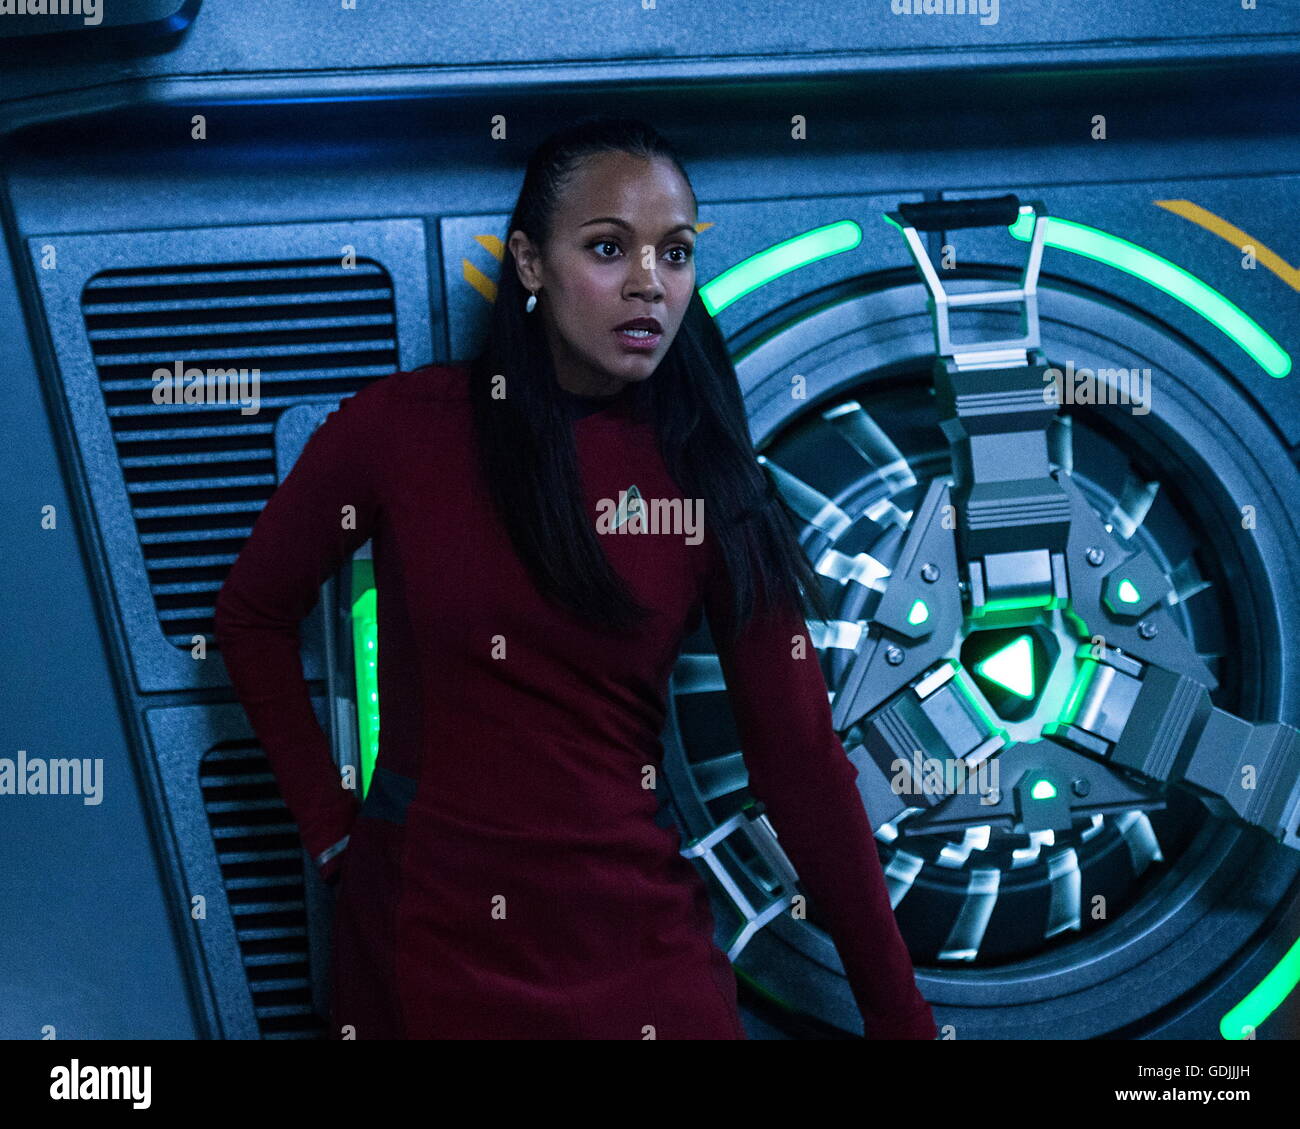 RELEASE DATE: July 22, 2016 TITLE: Star Trek Beyond STUDIO: Paramount Pictures DIRECTOR: Justin Lin PLOT: The USS Enterprise crew explores the furthest reaches of uncharted space, where they encounter a mysterious new enemy who puts them and everything the Federation stands for to the test PICTURED: Zoe Saldana as Lieutenant Uhura (Credit: c Paramount Pictures/Entertainment Pictures/) Stock Photo